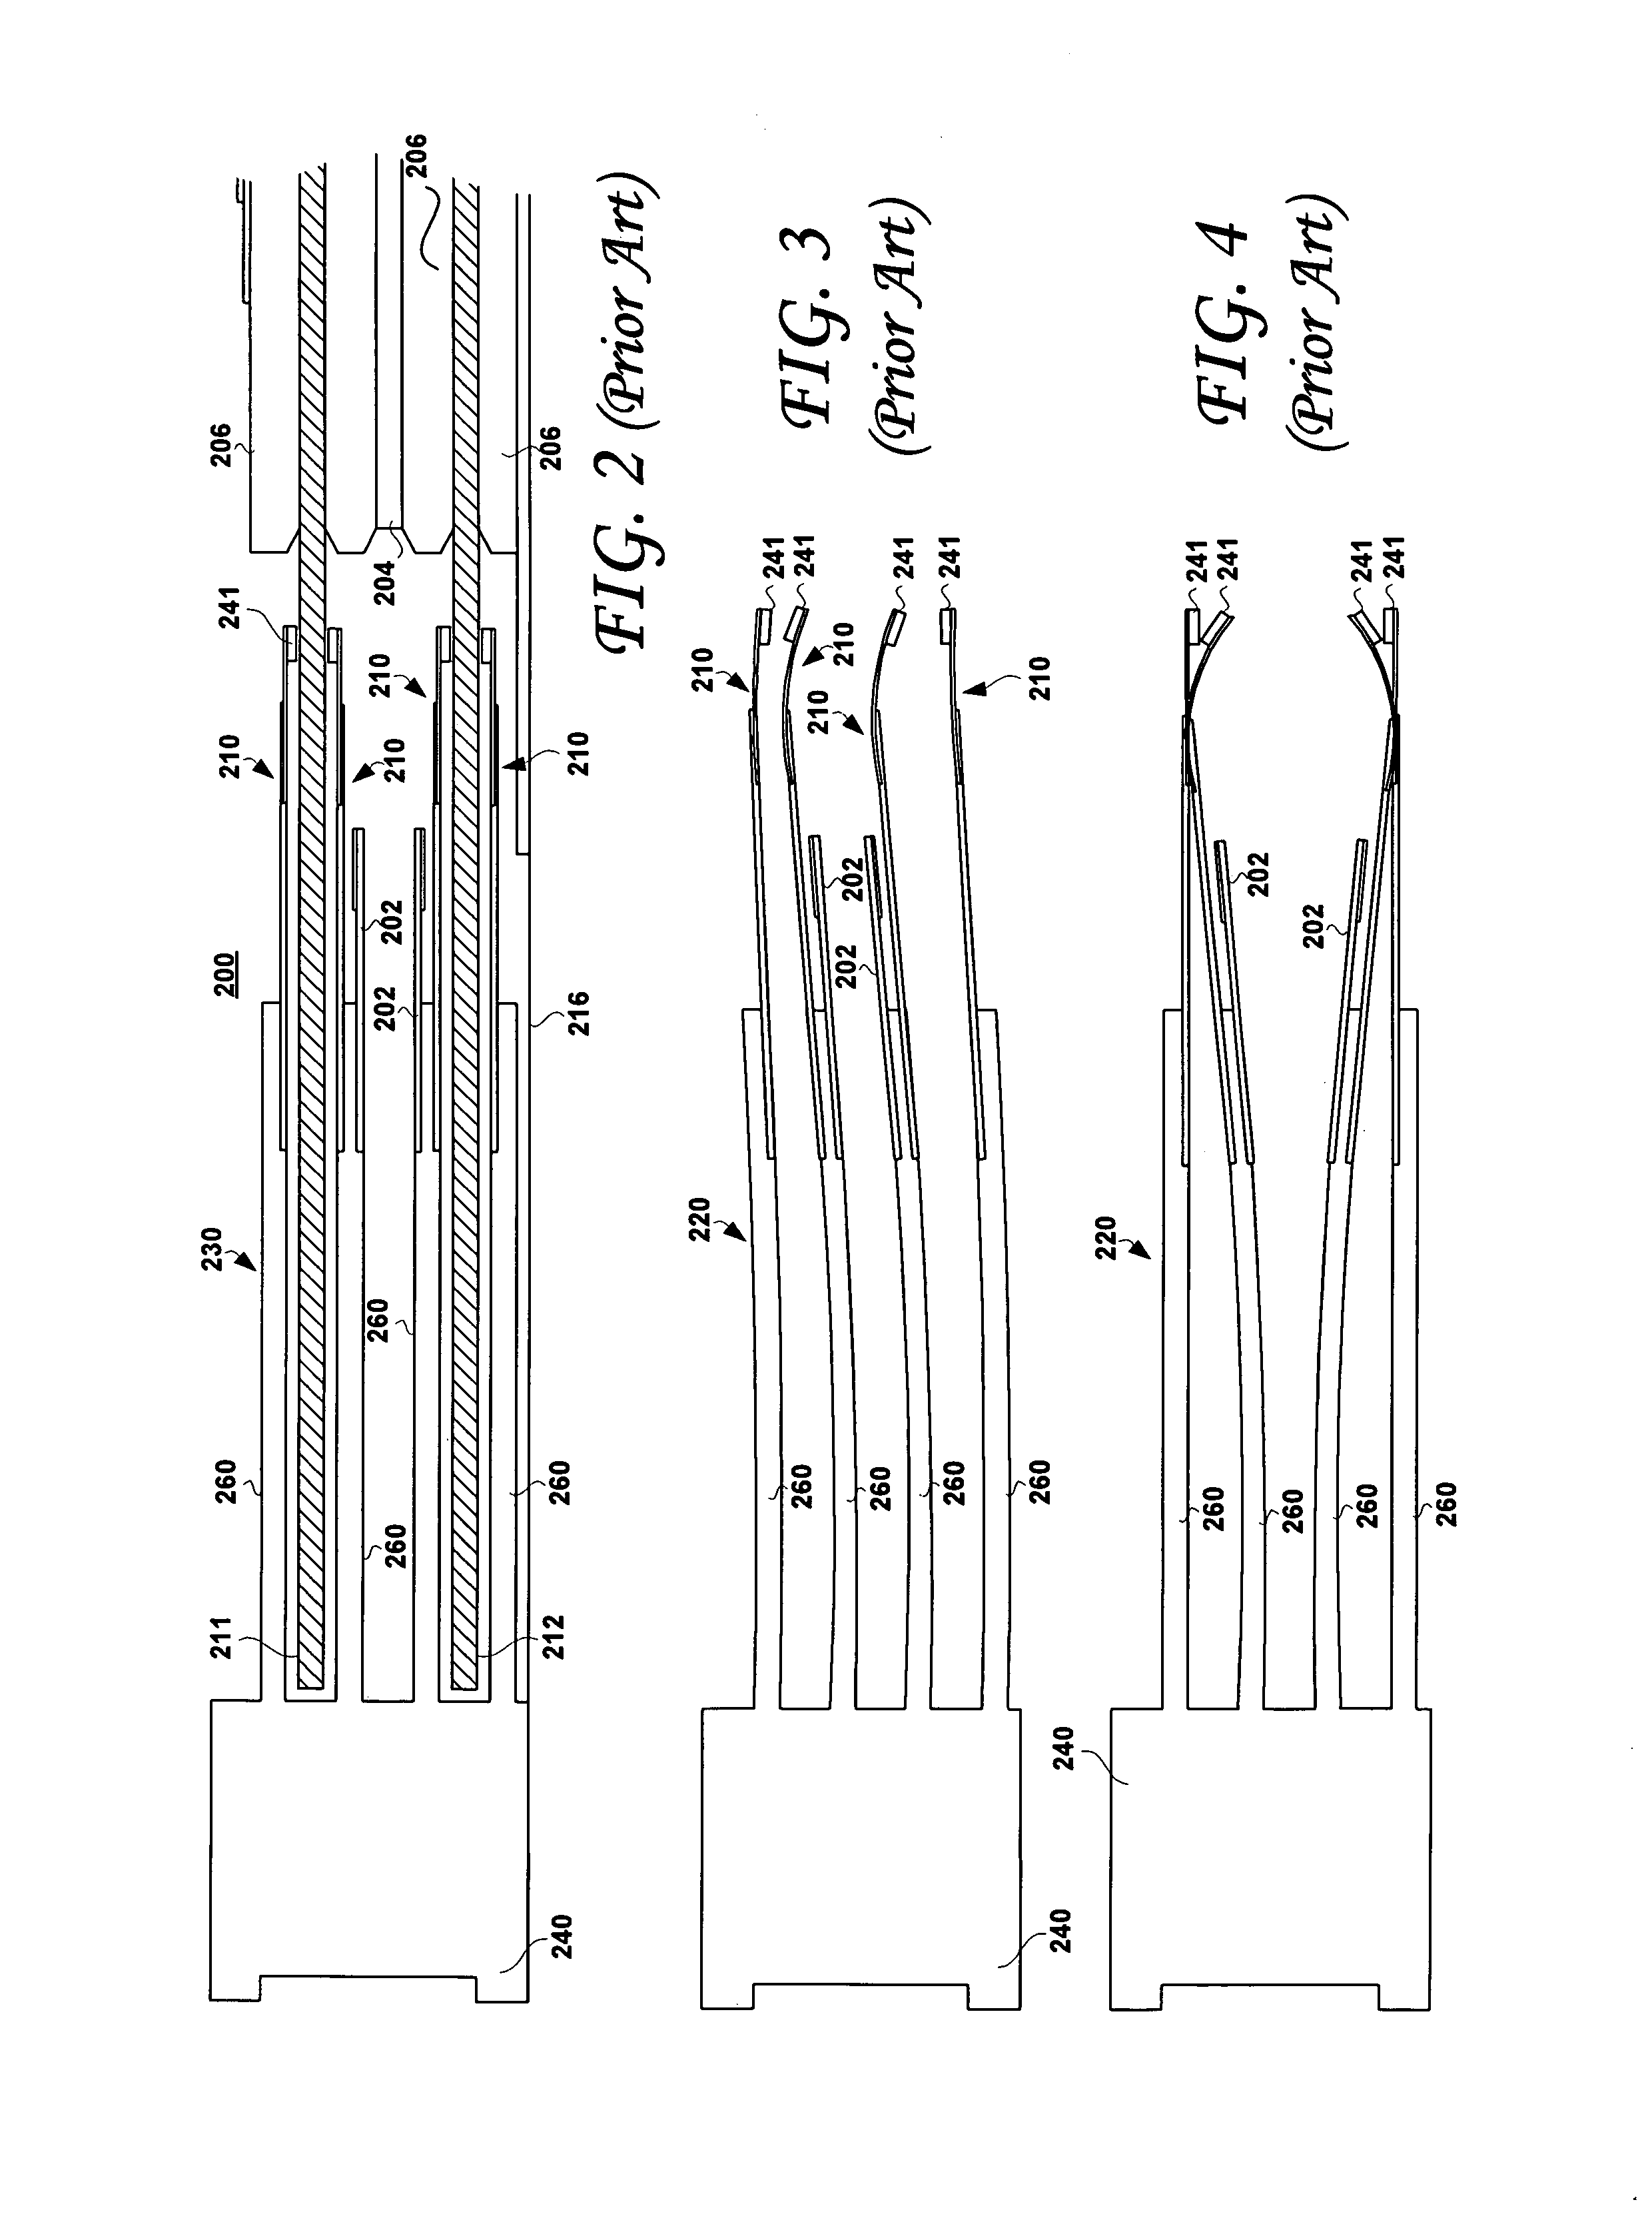 Head stack and actuator arm assemblies and disk drives having an actuator including an actuator arm spacer to increase actuator and suspension stiffness and to reduce the number of actuator arm resonance modes